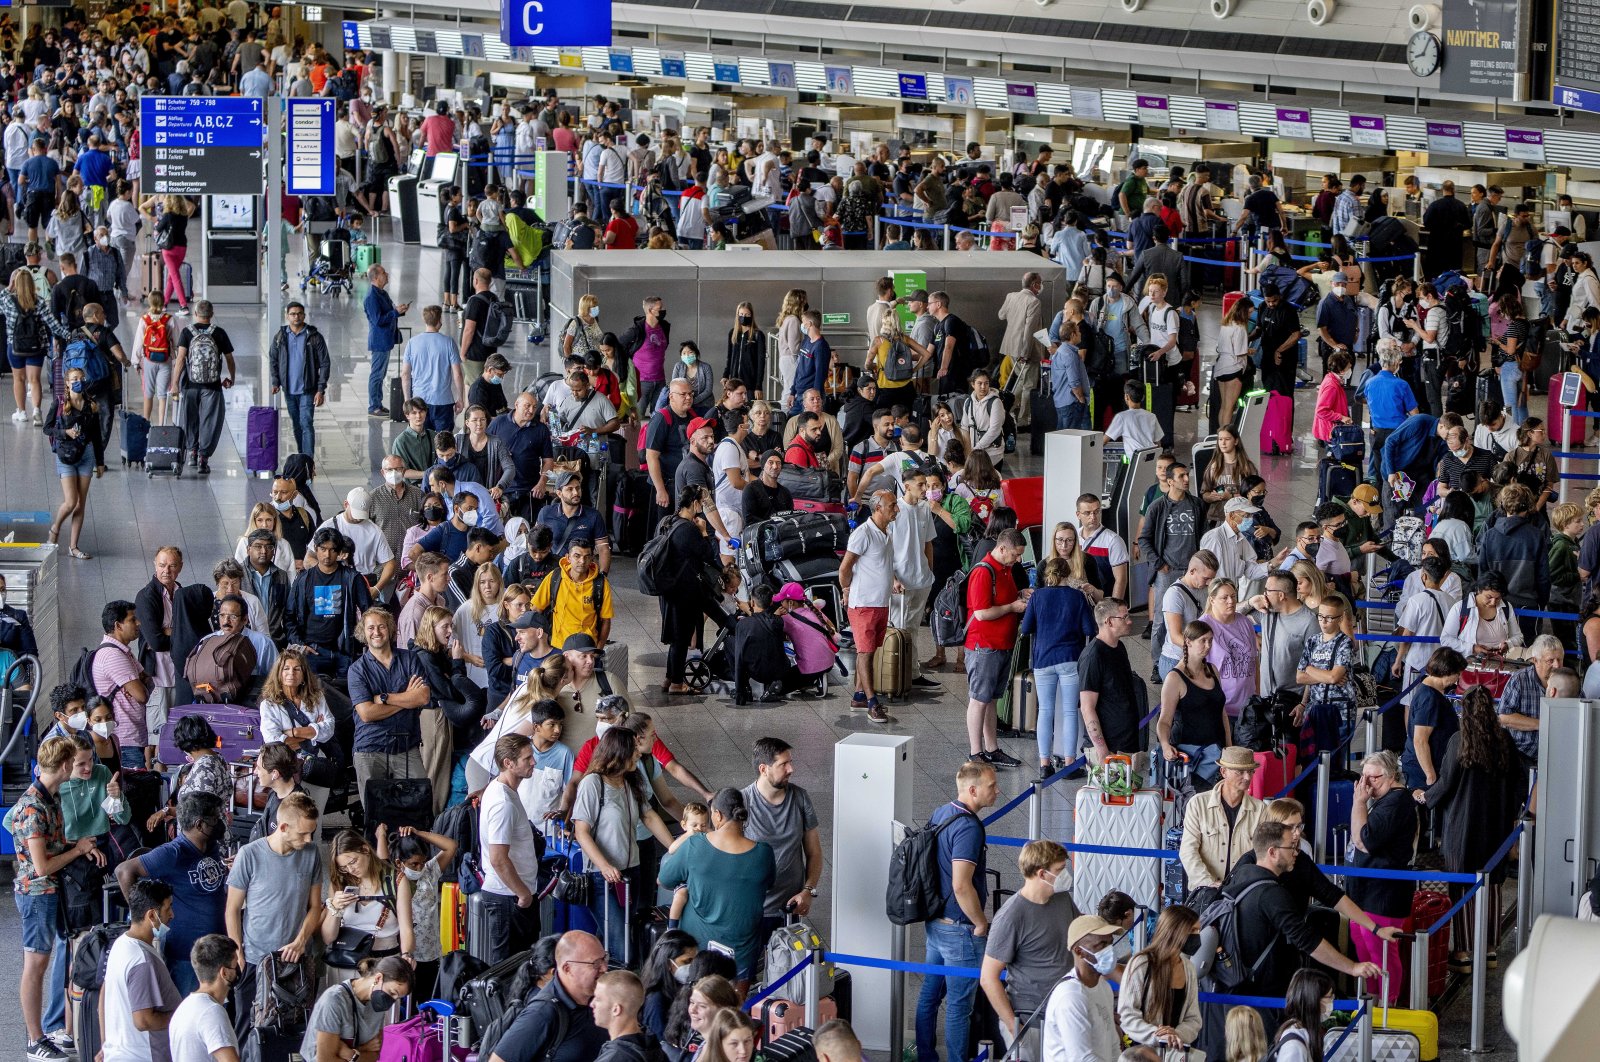 Passengers queue at check-in counters at the international airport in Frankfurt, Germany, July 27, 2022. (AP Photo)